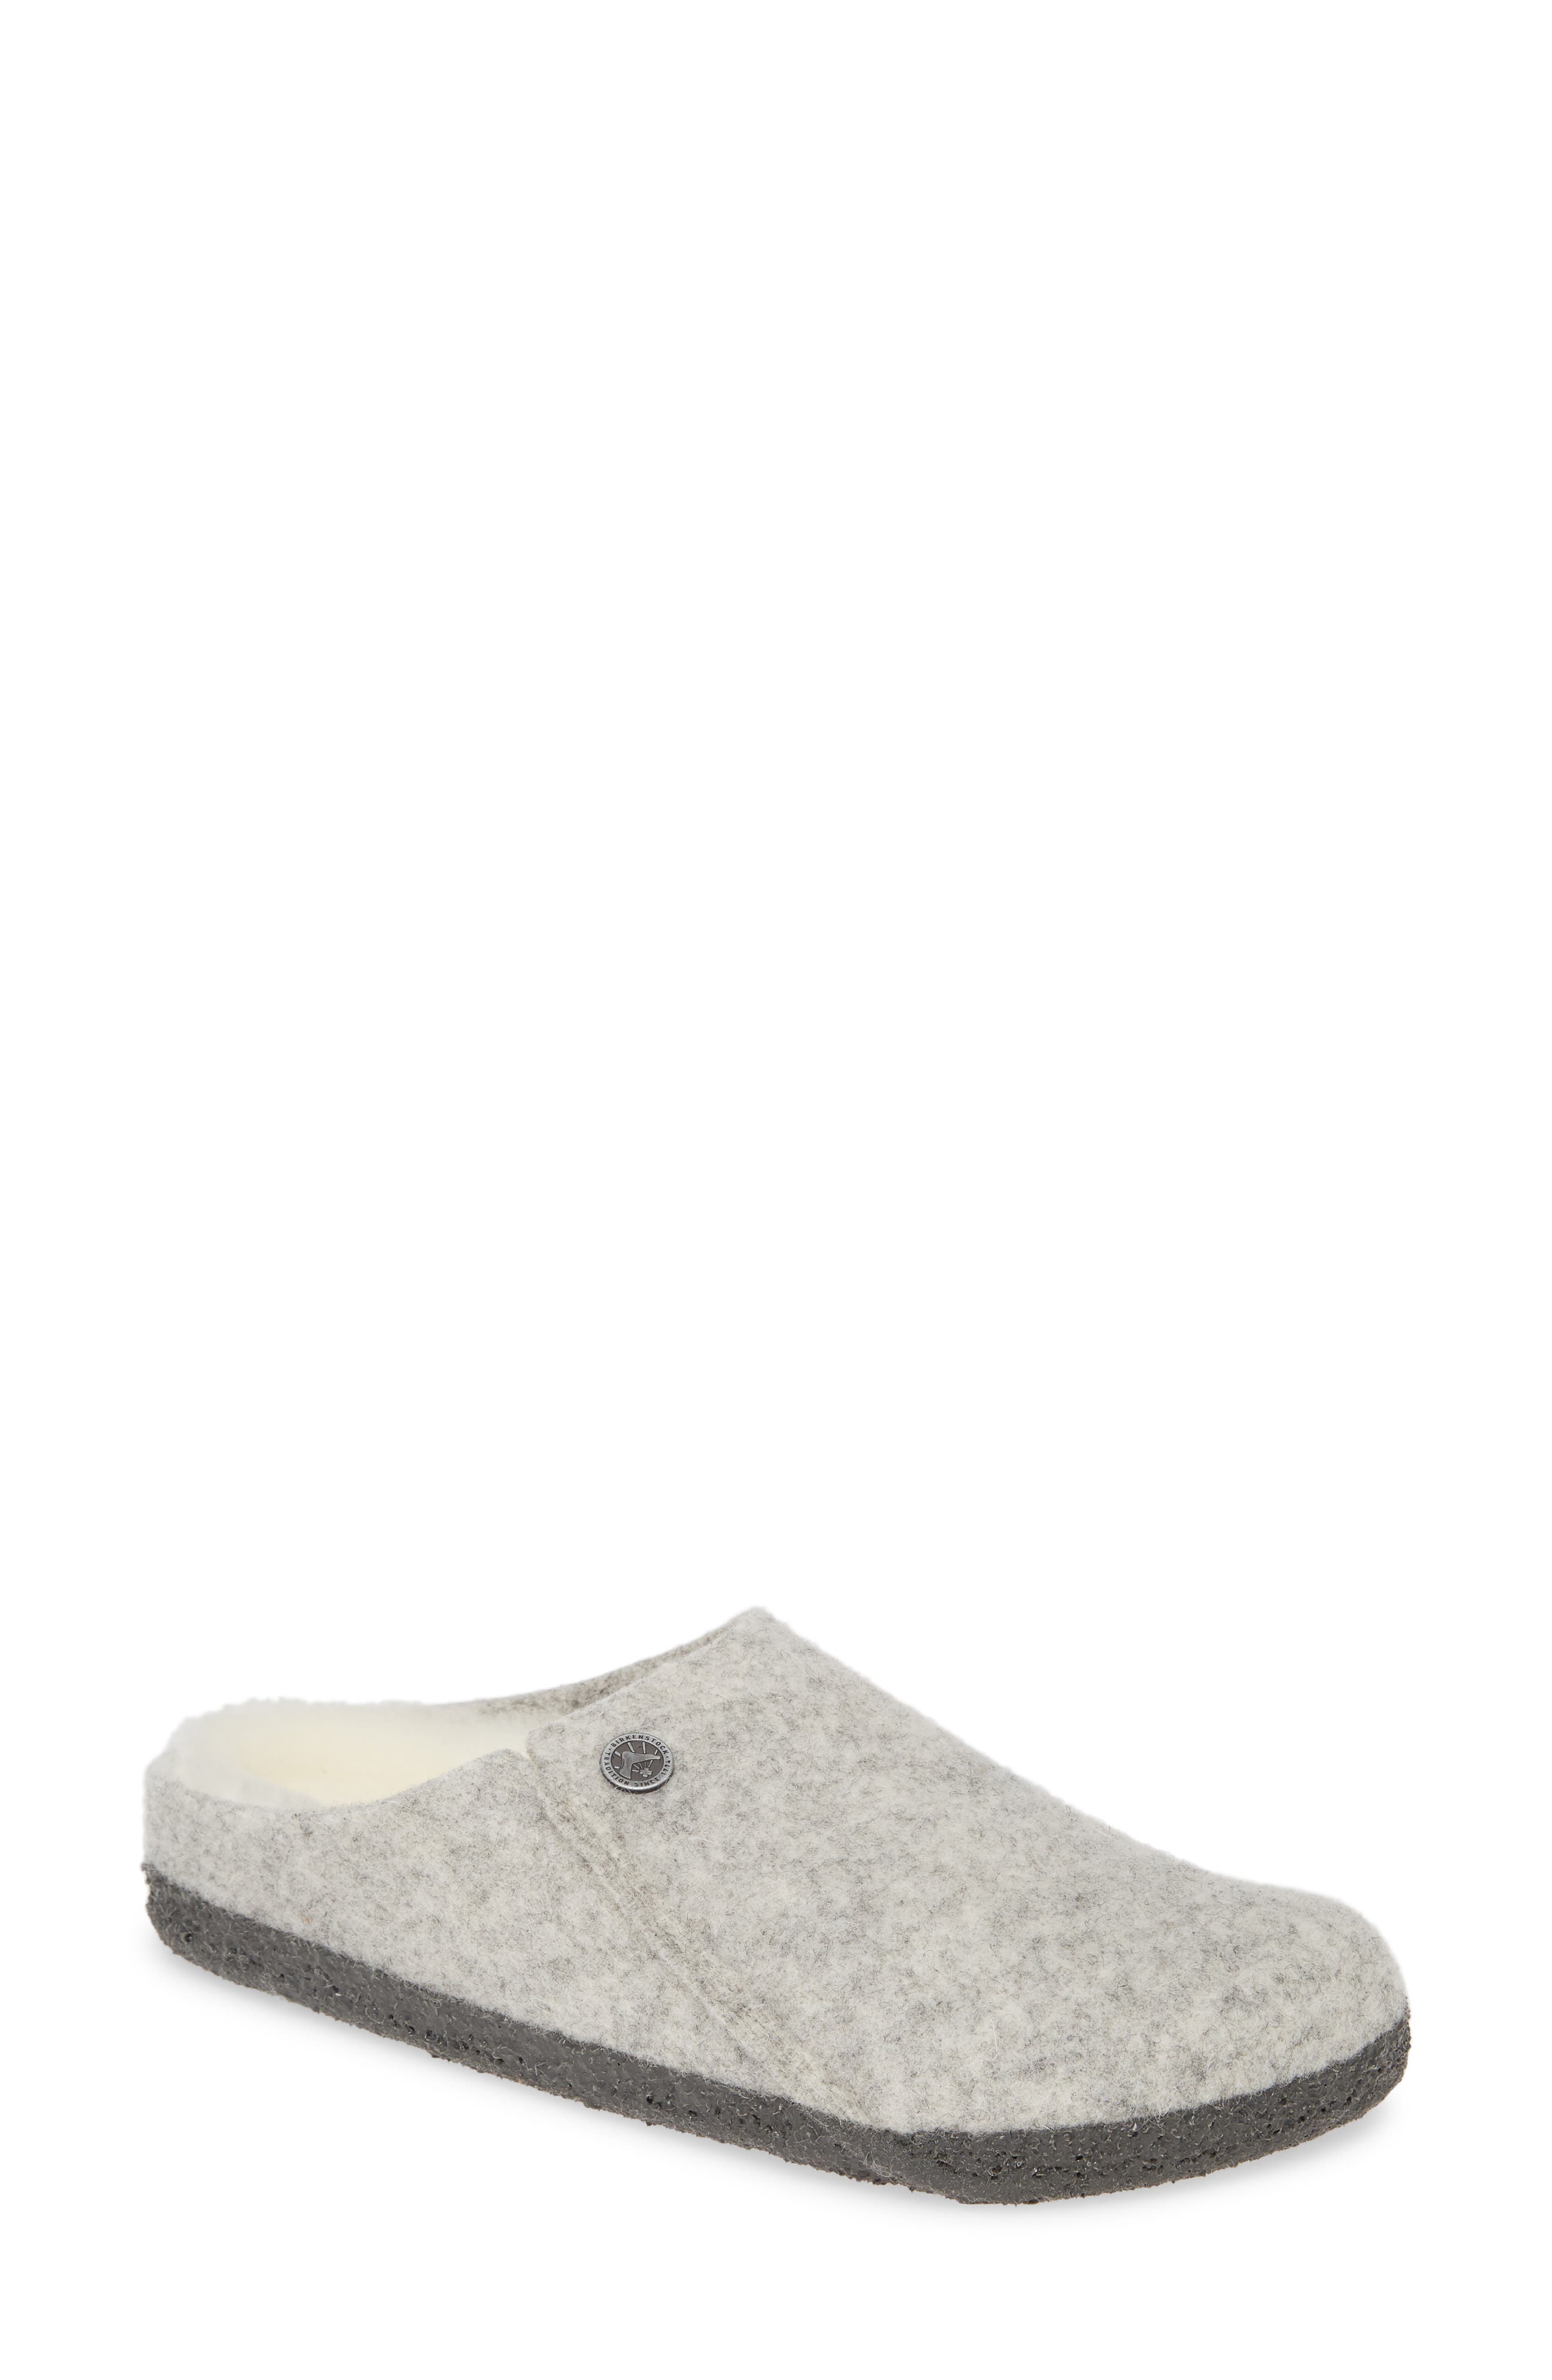 Women's Slippers with Arch Support 